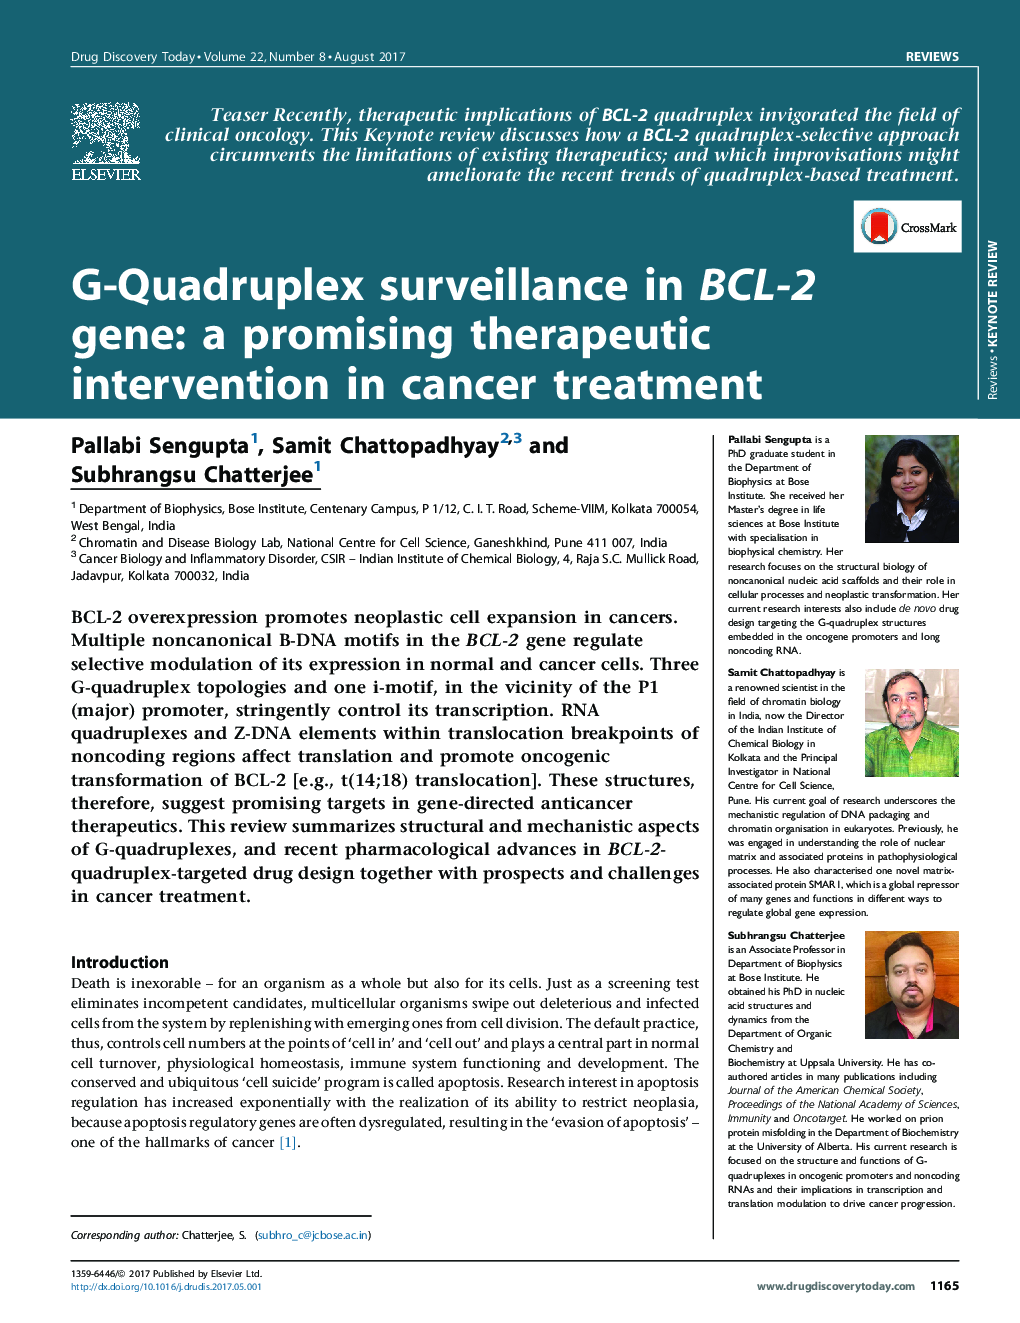 ReviewKeynoteG-Quadruplex surveillance in BCL-2 gene: a promising therapeutic intervention in cancer treatment